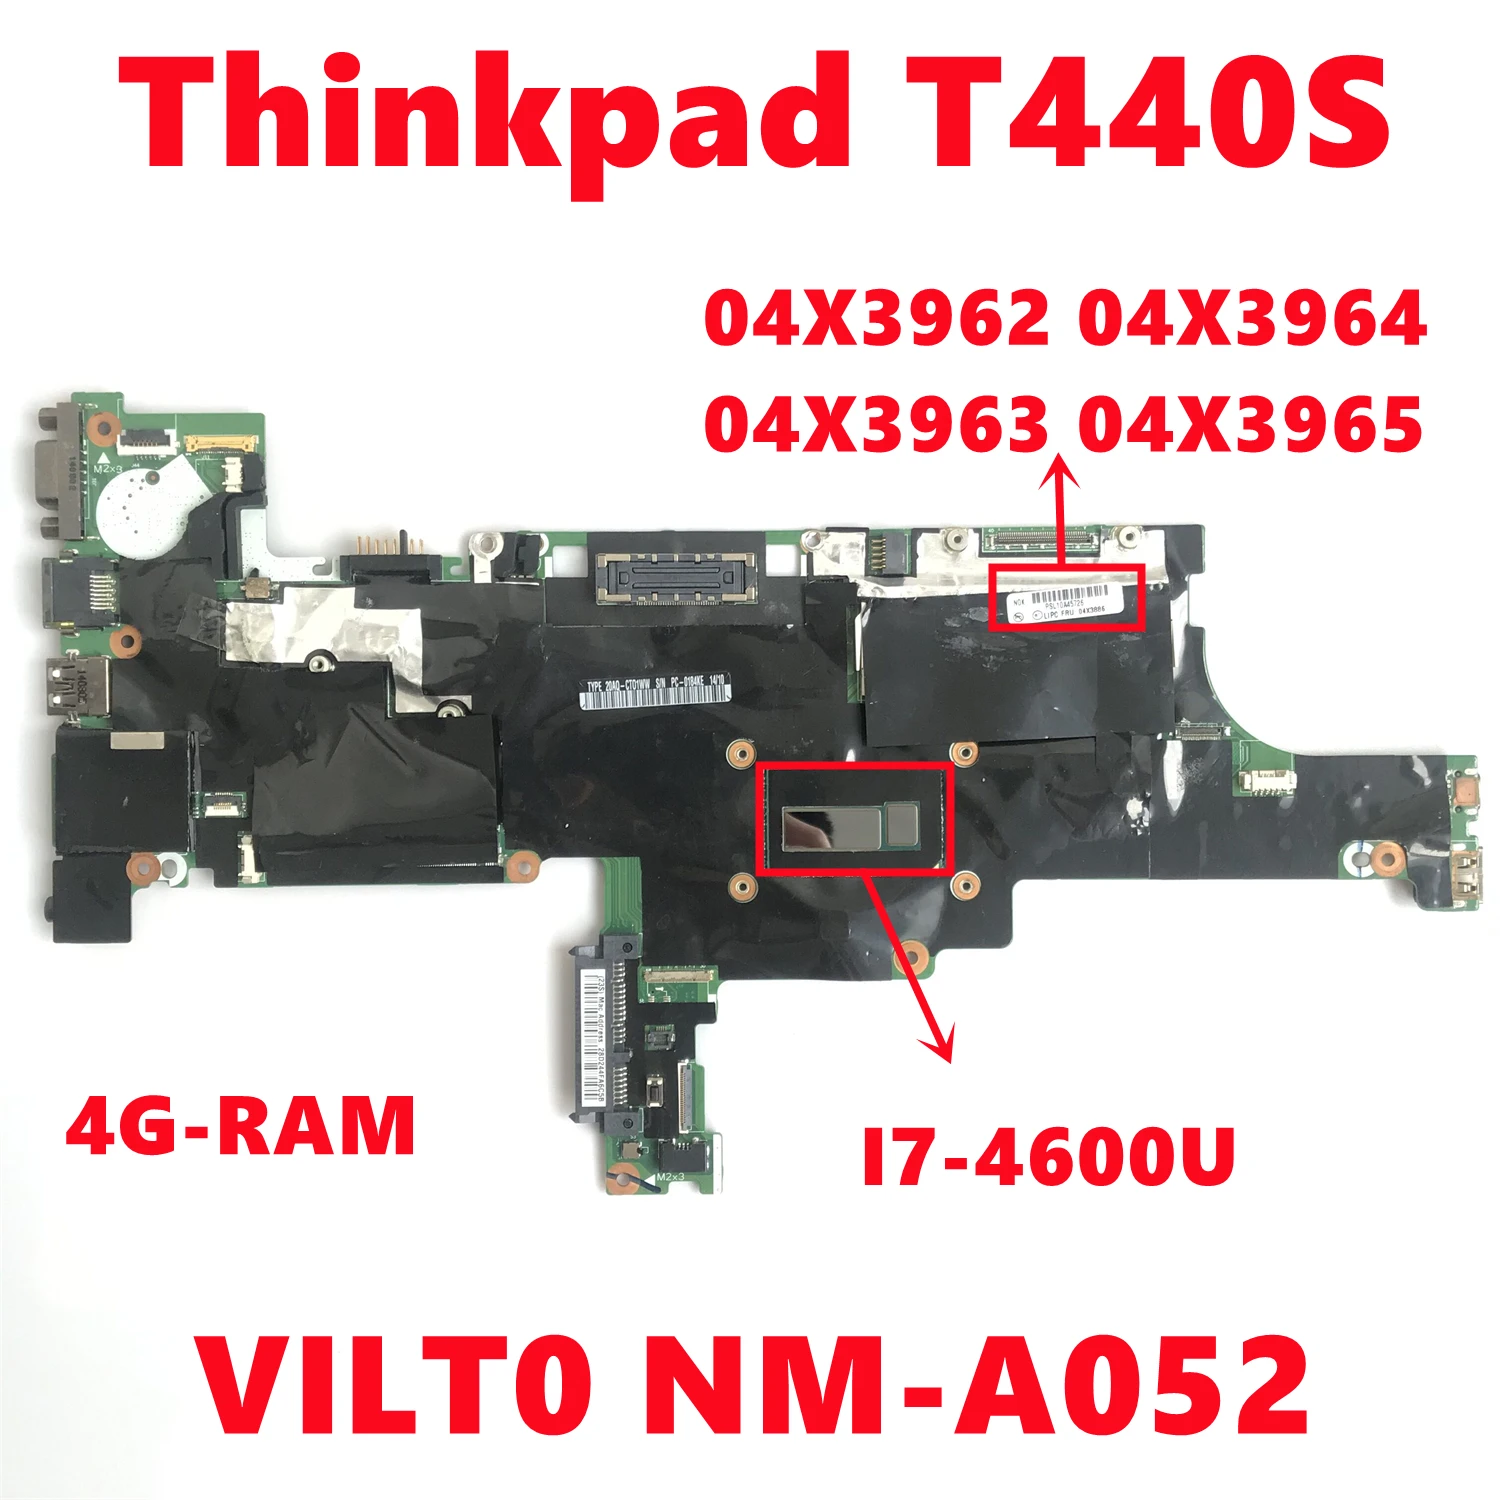 

FRU:04X3962 04X3964 04X3963 04X3965 For Lenovo Thinkpad T440S Laptop Motherboard VILT0 NM-A052 With I7-4600U 4G-RAM 100% Tested